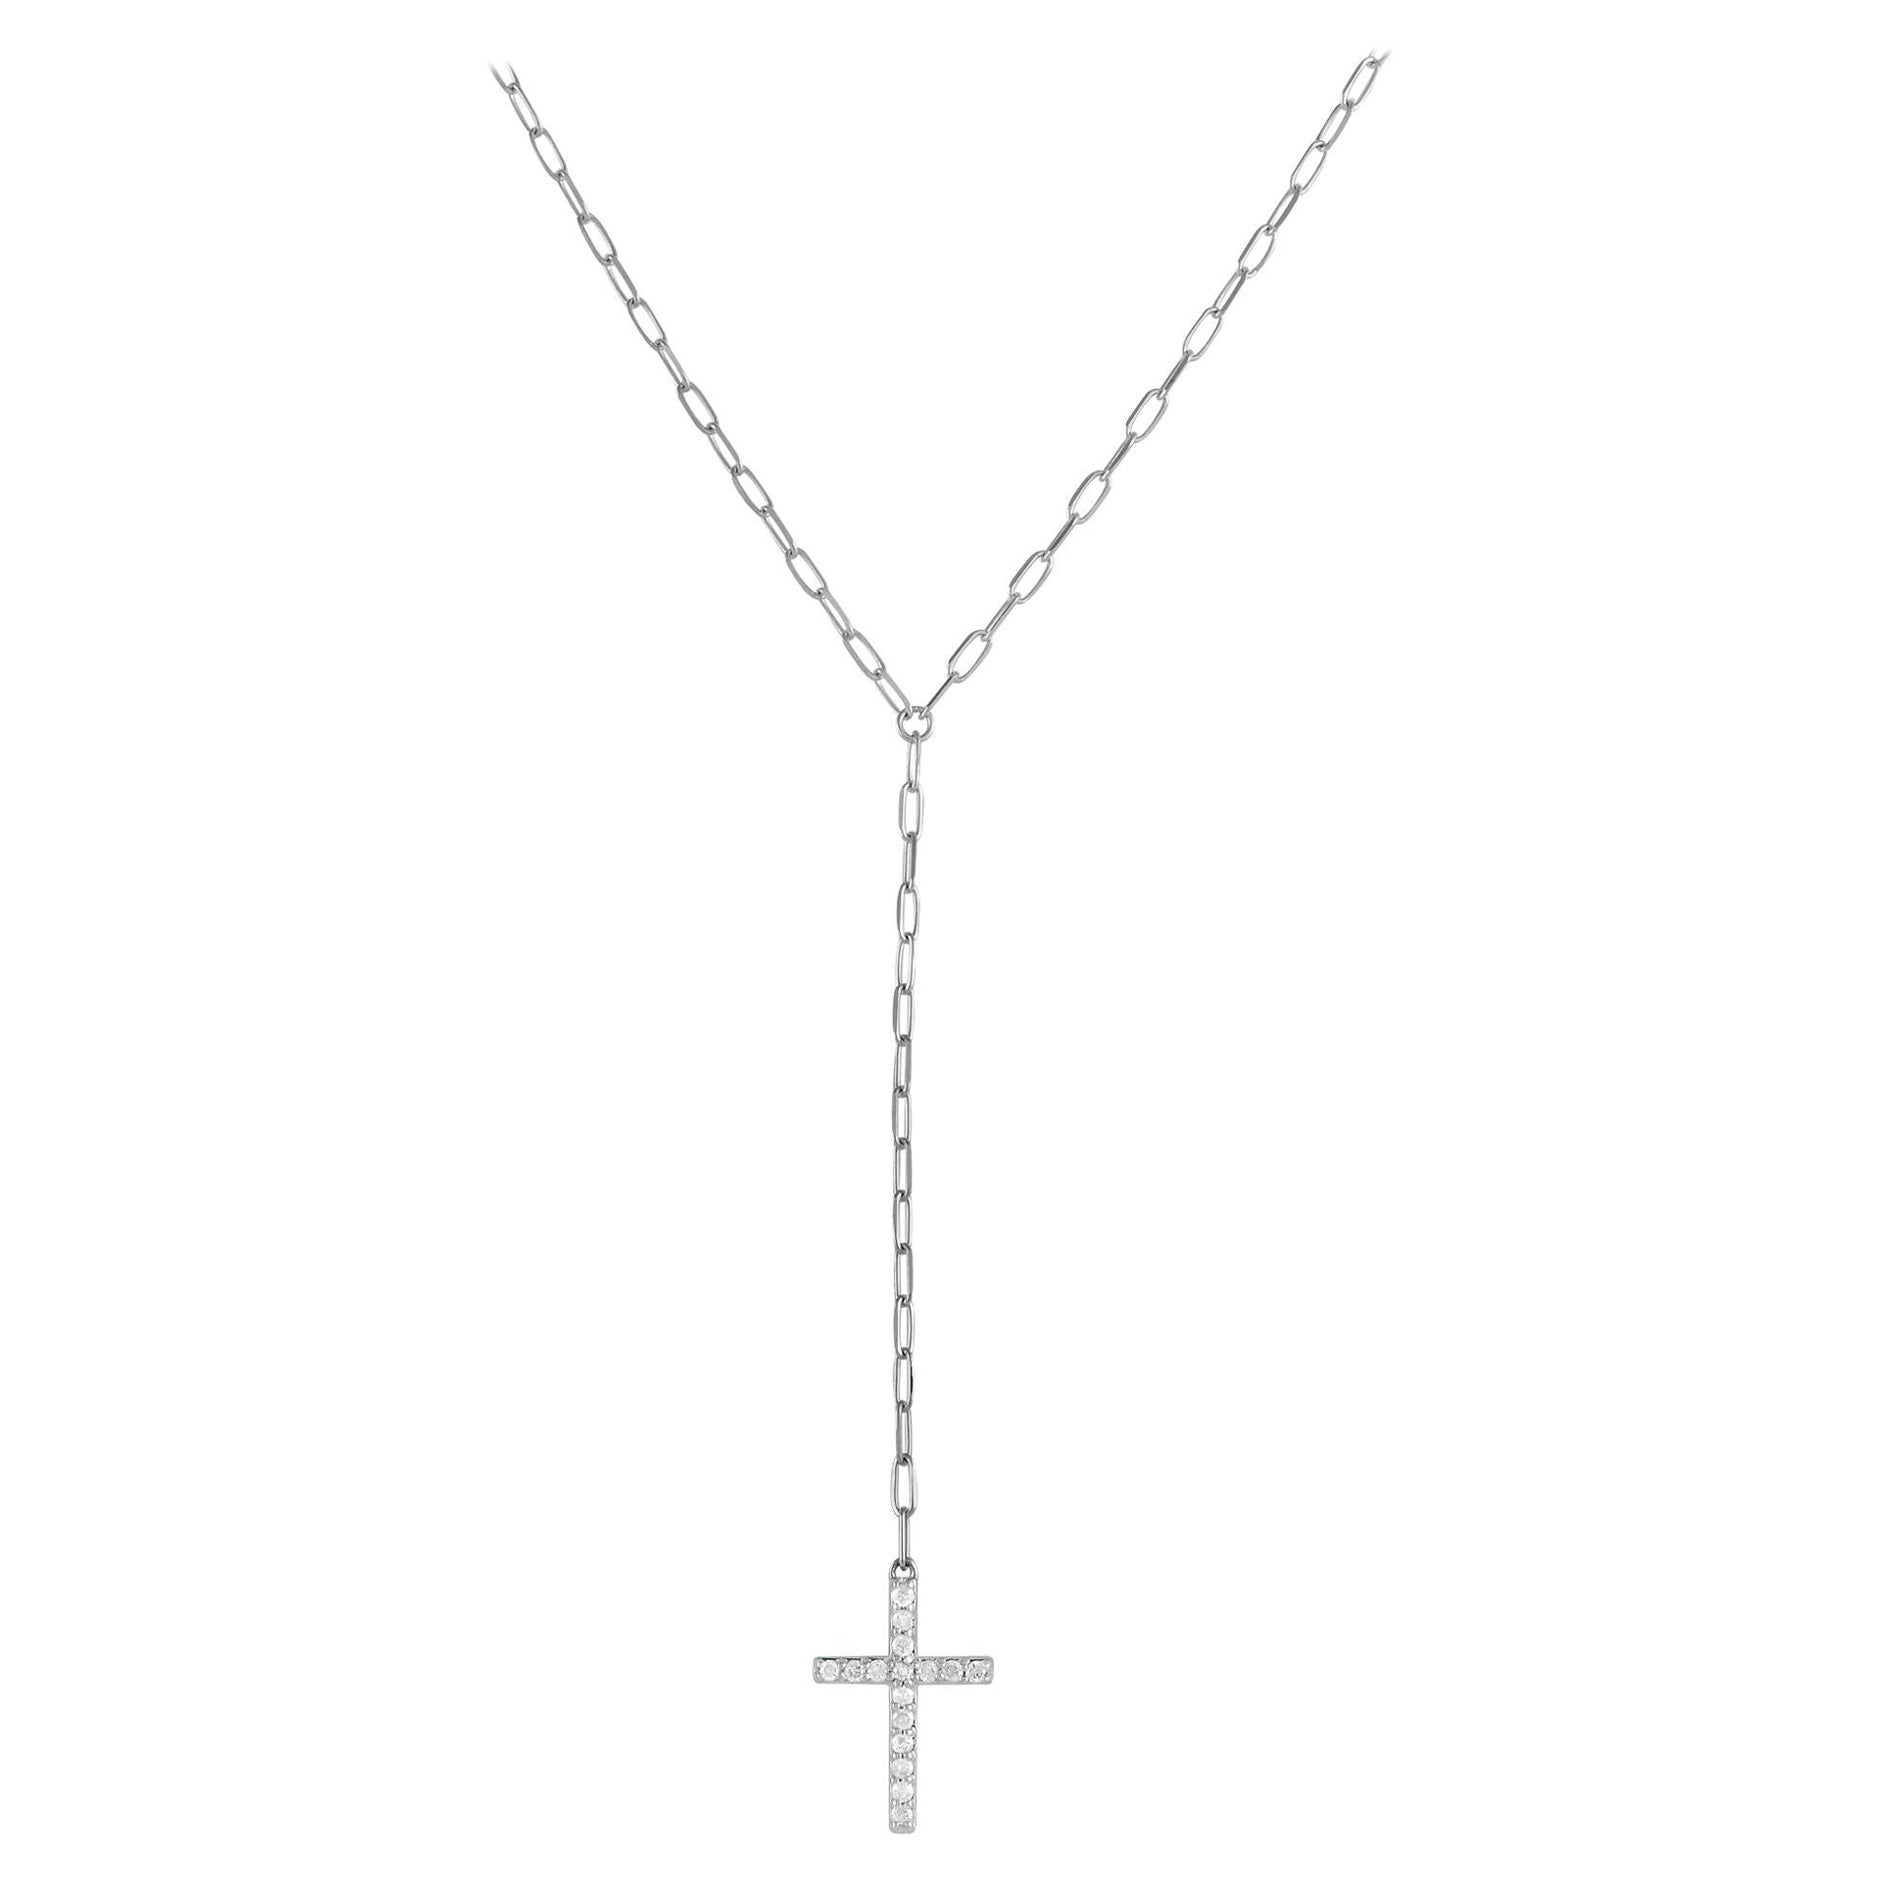 LB Exclusive 14K White Gold 0.16ct Diamond Cross Link Necklace NK01133